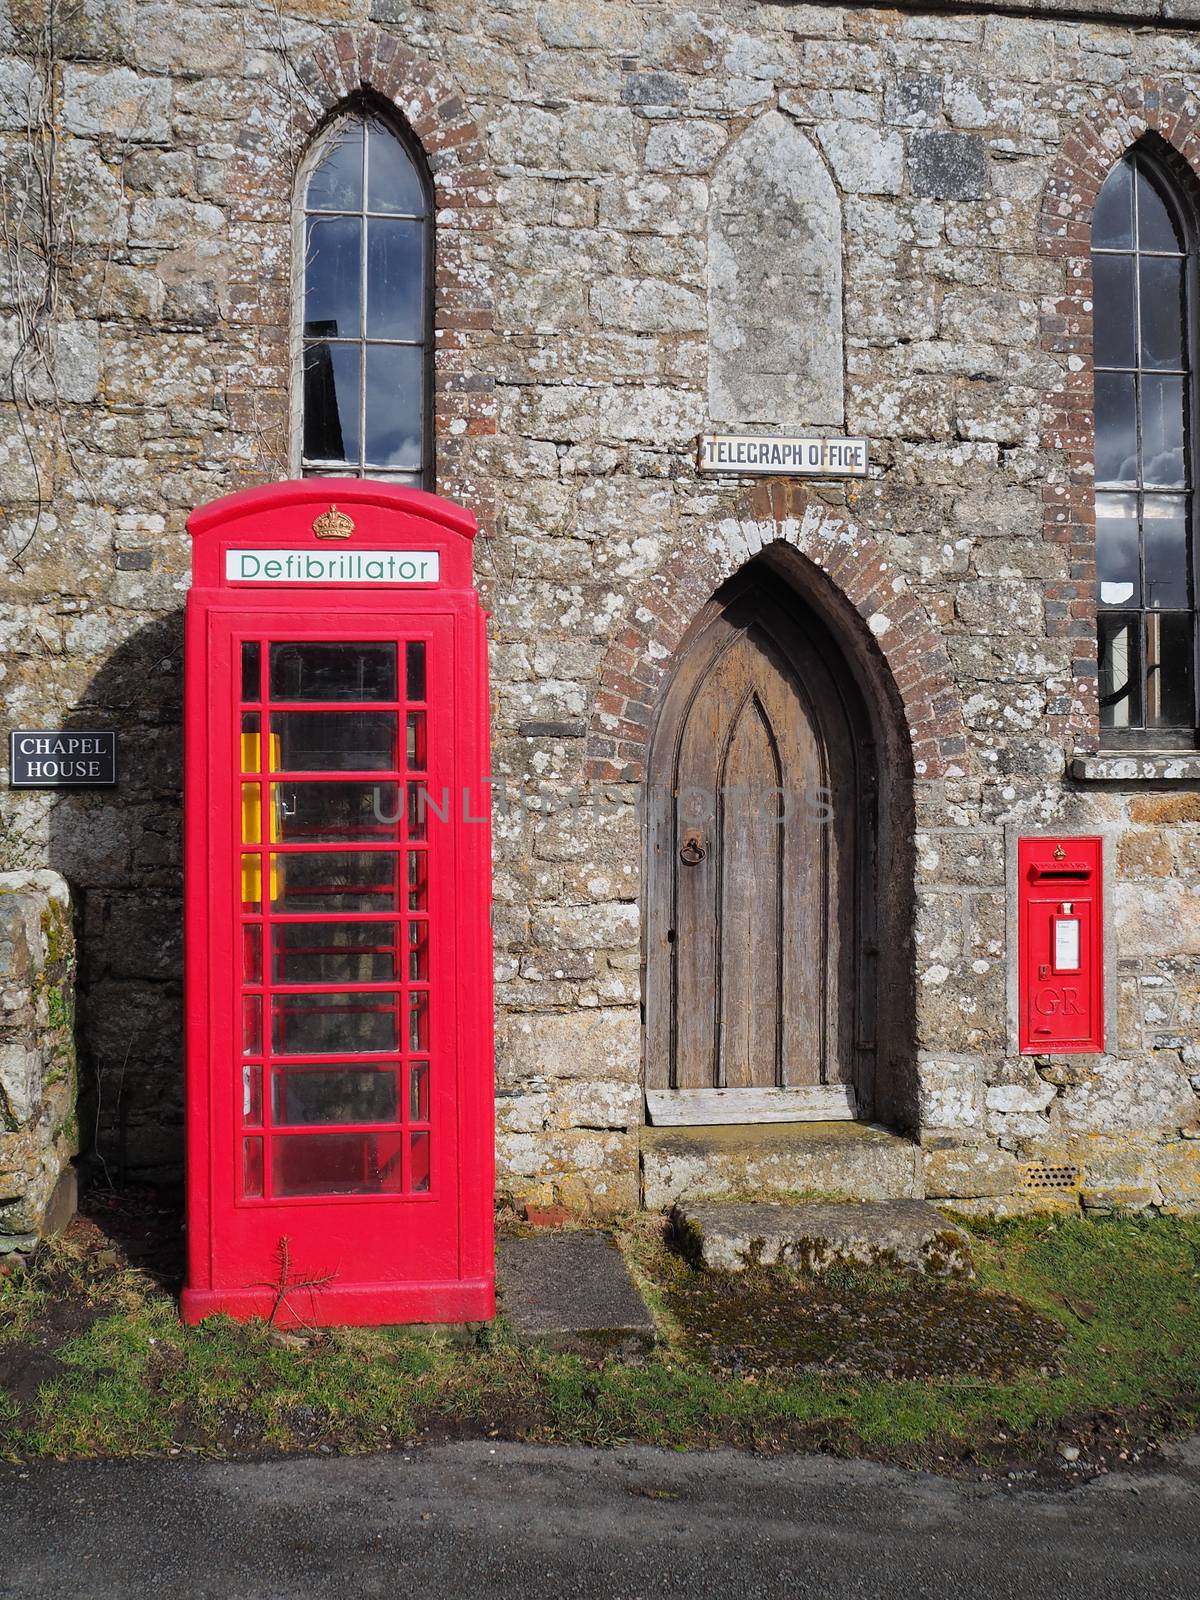 Traditional red British public telephone box with defibrillator unit, Dartmoor by PhilHarland